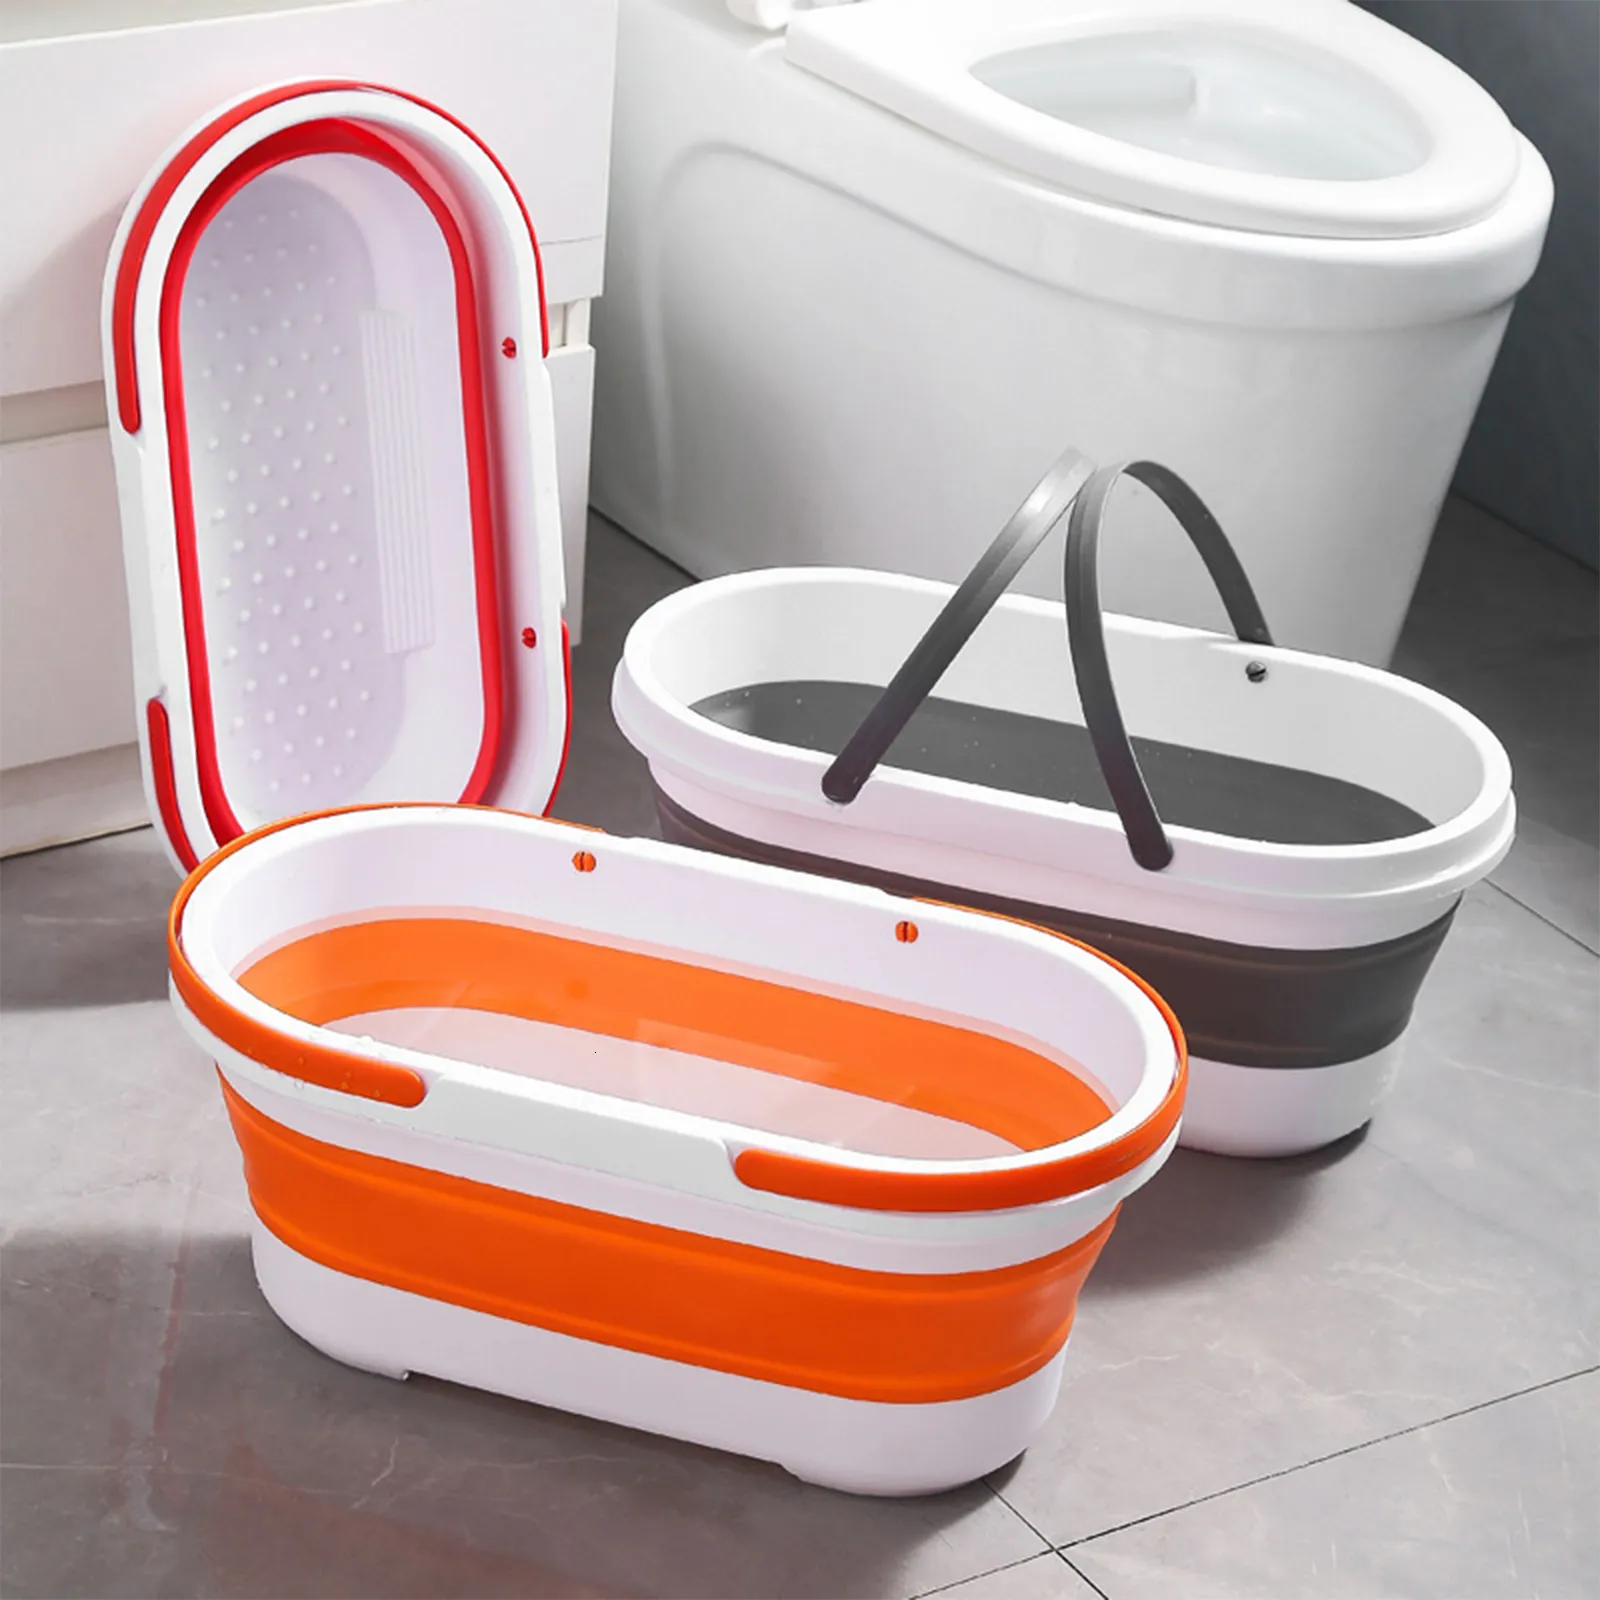 Buckets 14L Foldable Mop Bucket Collapsible Portable Wash Basin